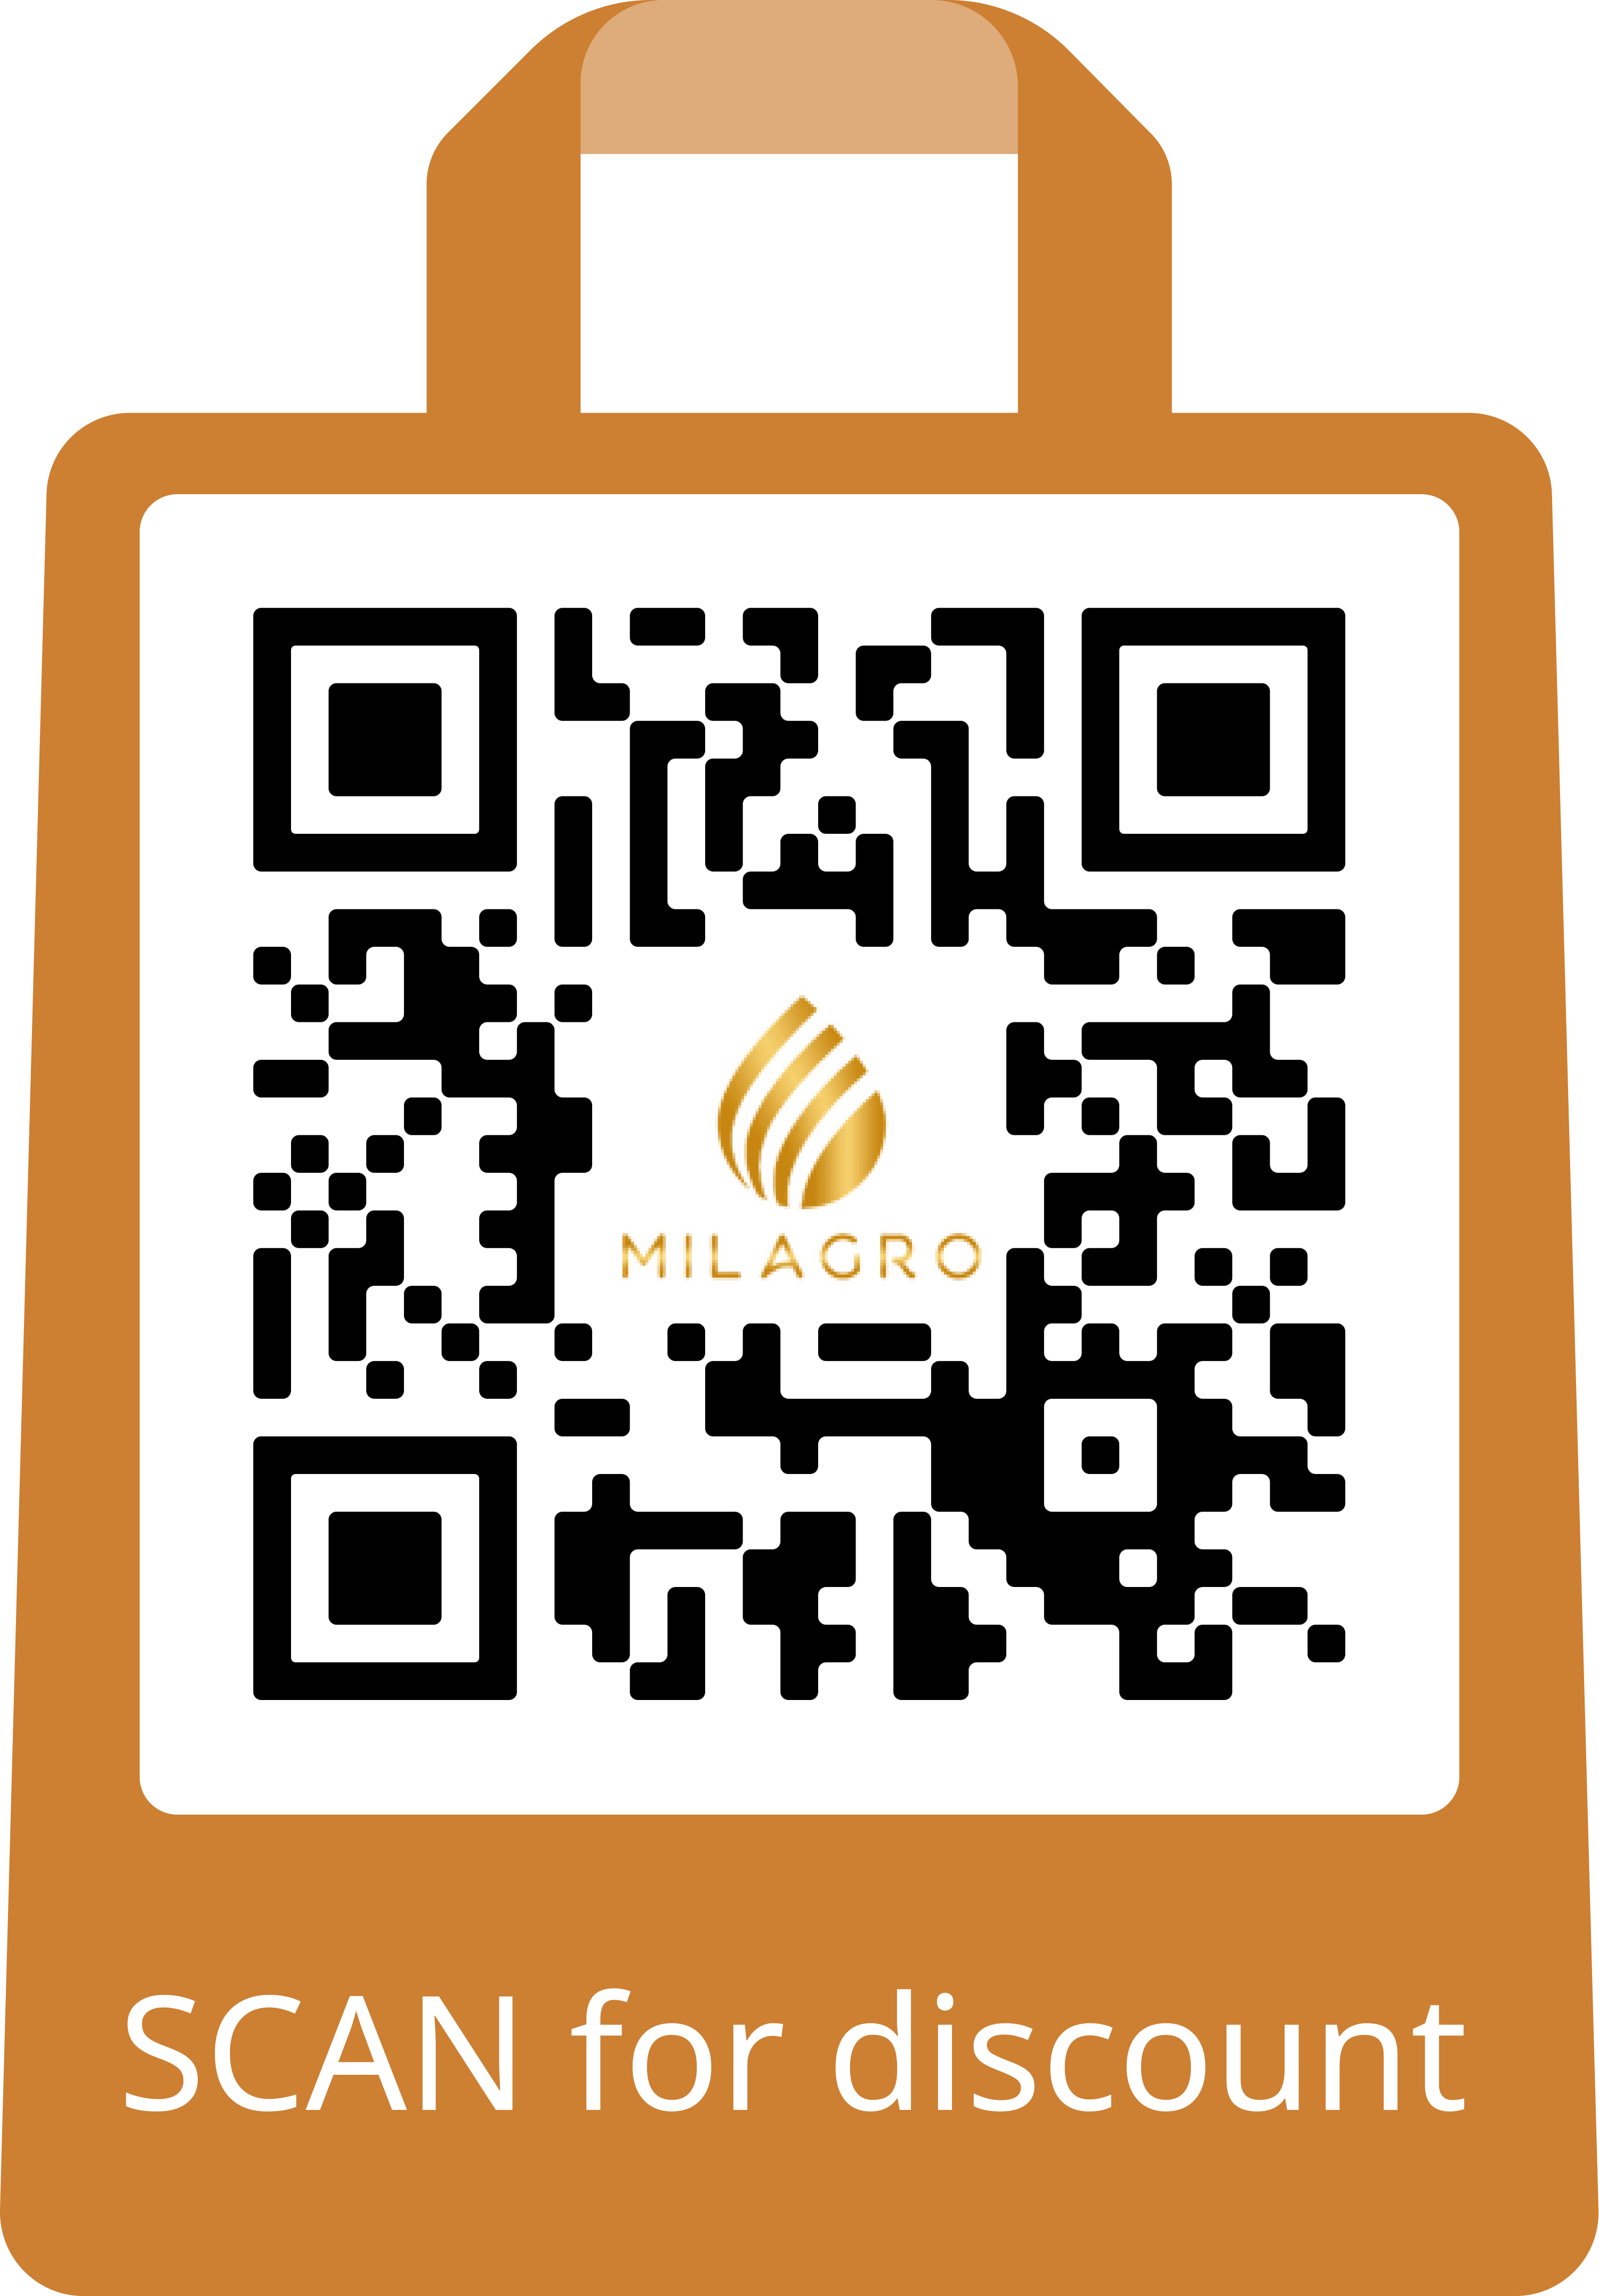 Scan for Discount call to action